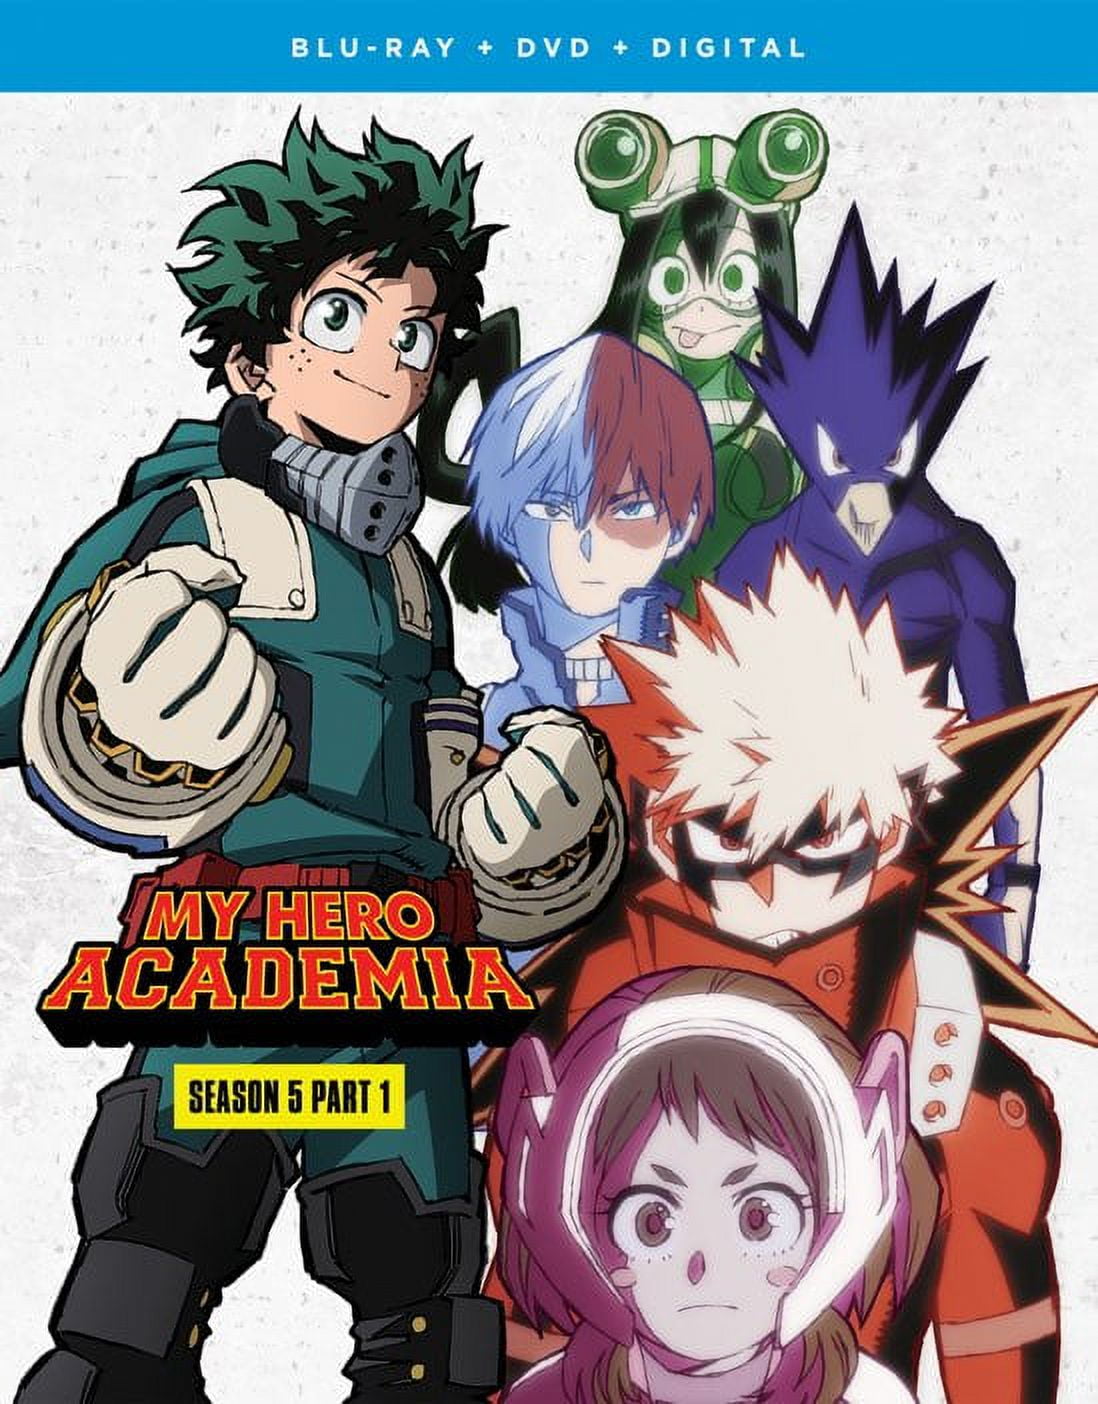 My Hero Academia gets a fourth anime movie set after season 6 of the TV show